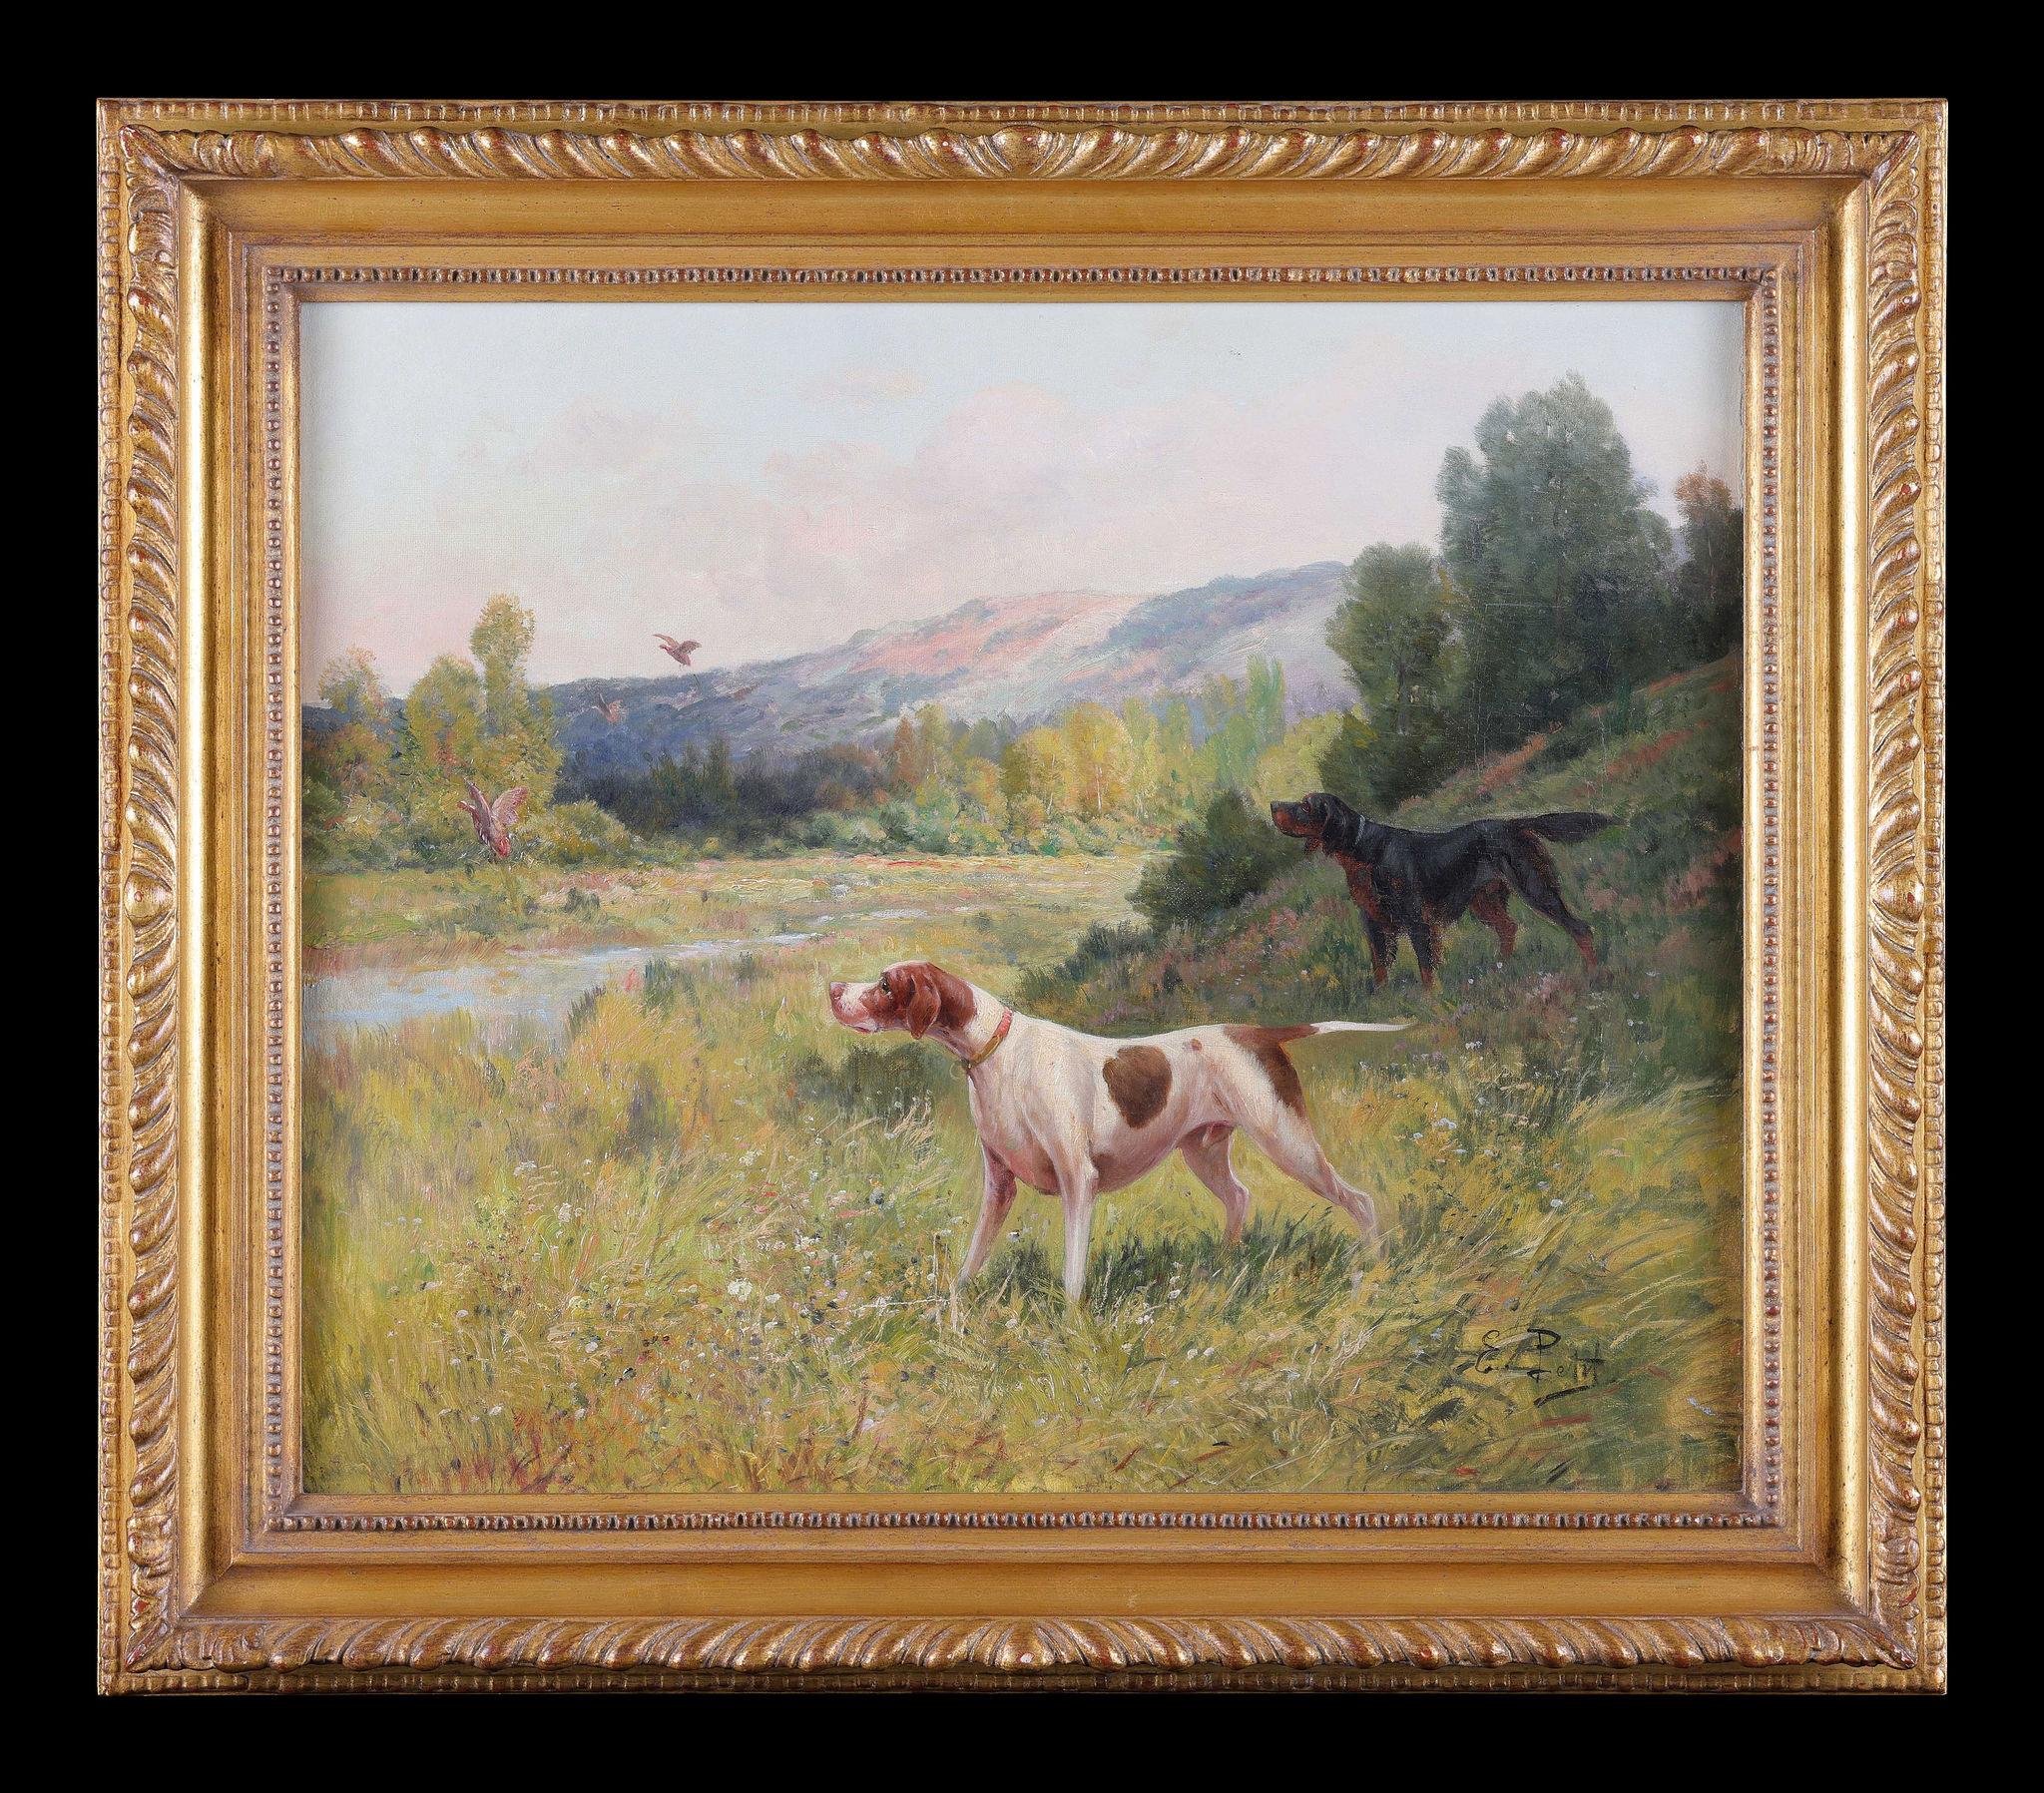 Eugene Petit Landscape Painting - The Ones that Got Away - Two Pointer Dogs by a River